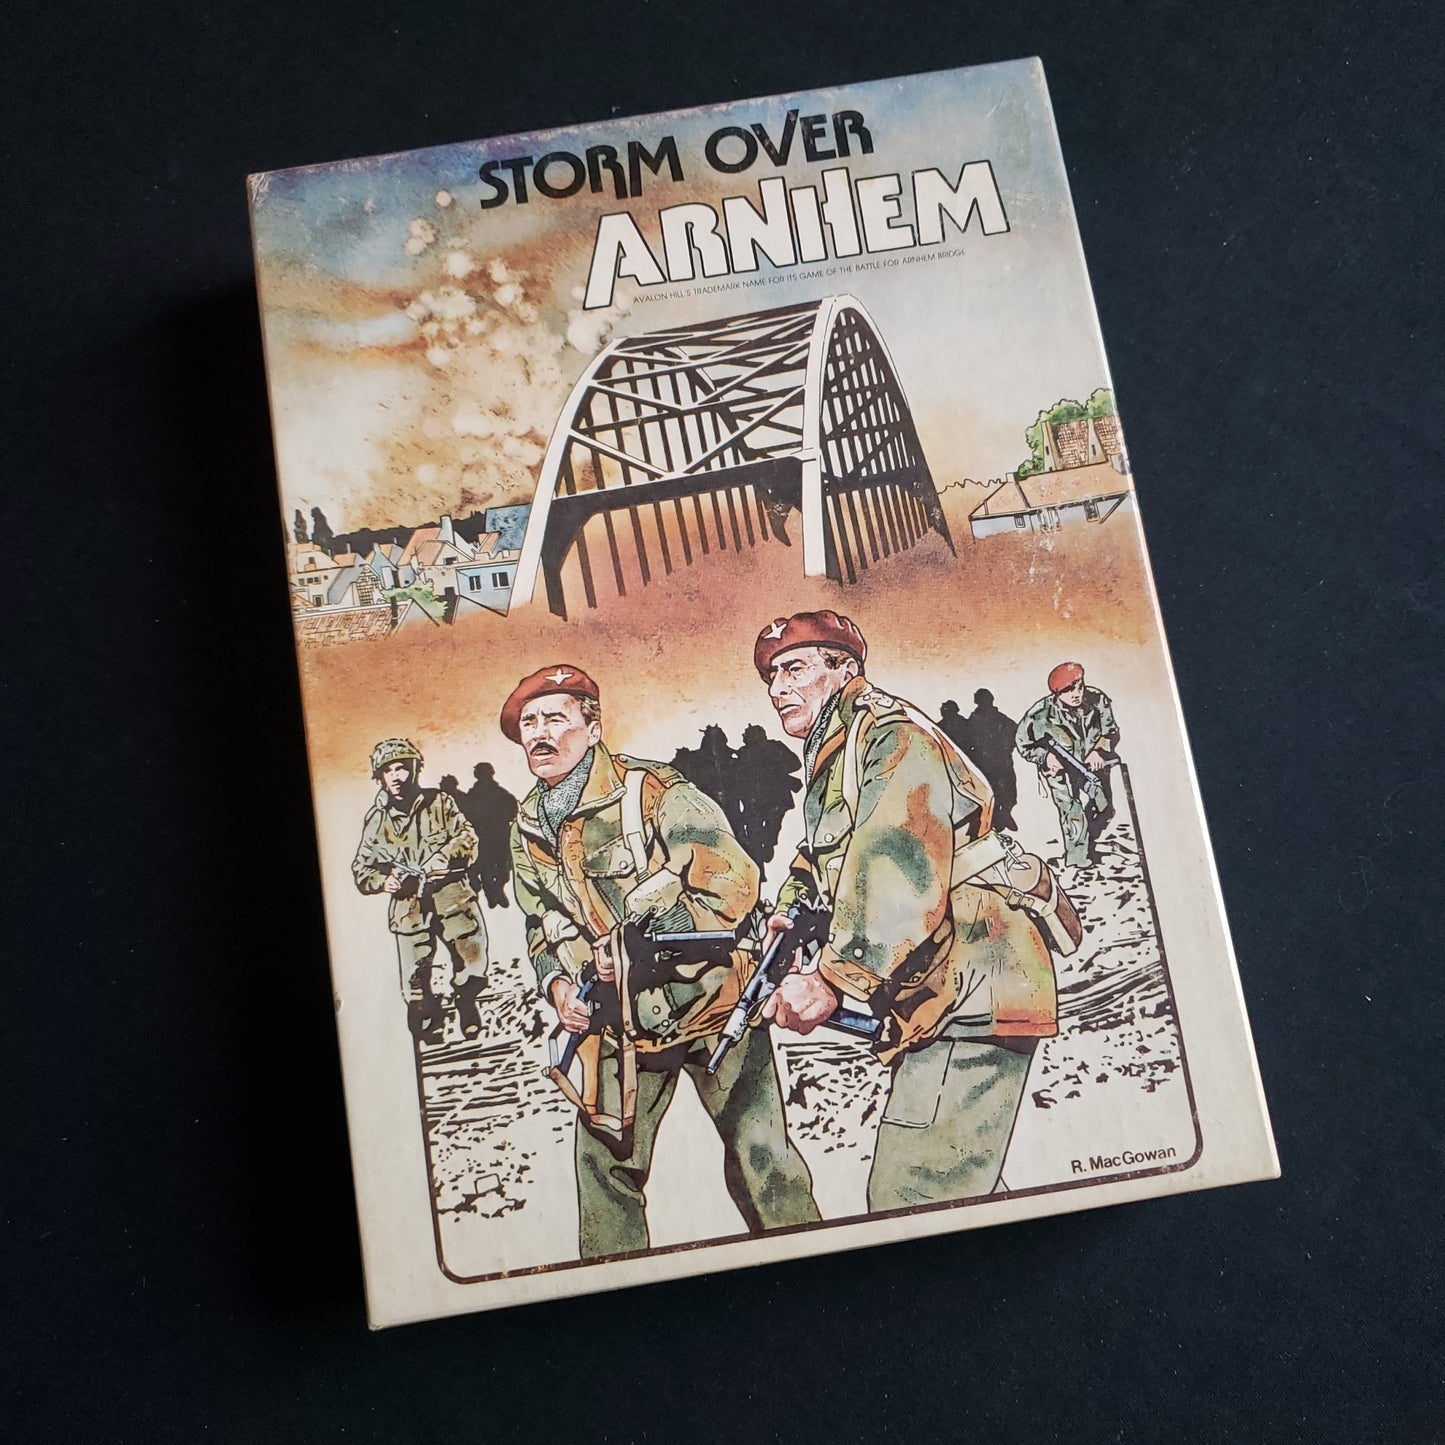 Image shows the front cover of the box of the Storm Over Arnhem board game